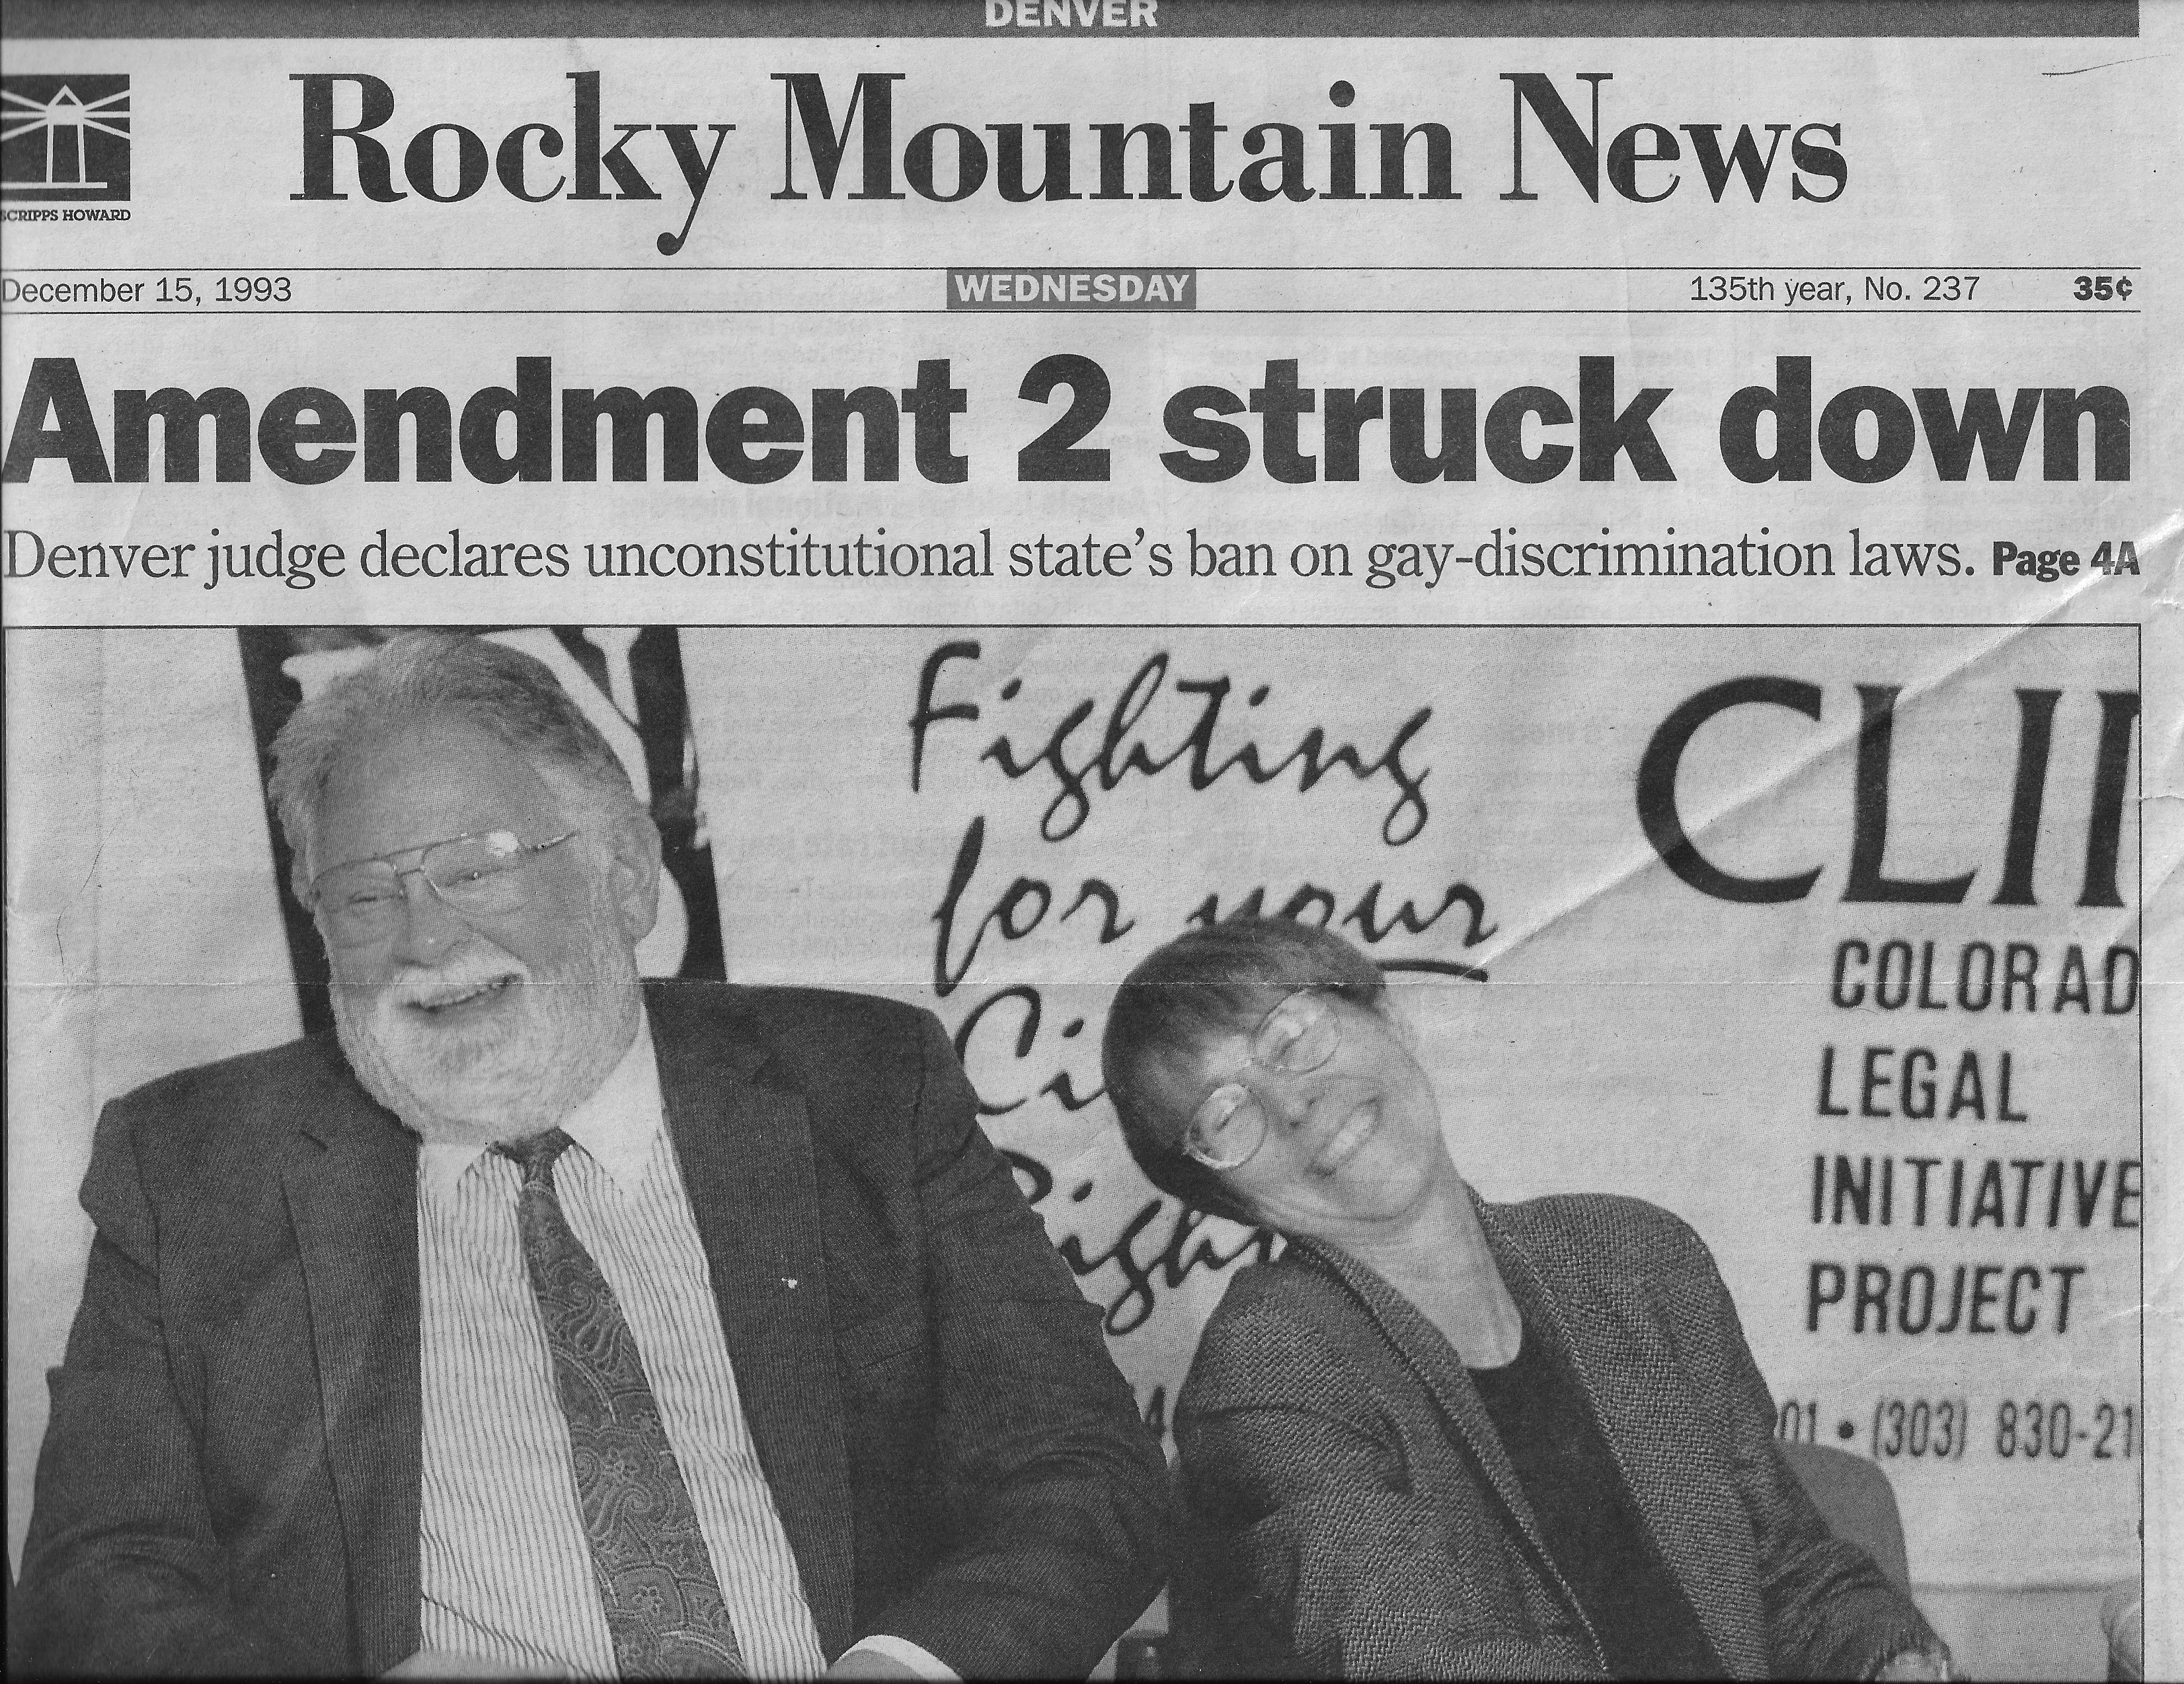 Image of the front page of the Rocky Mountain News newspaper on December 15, 1993. The headline reads "Amendment 2 struck down. Denver judge declares unconstitutional state's ban on gay-discrimination laws. Page 4A" and shows a photo of Jean Dubofsky sitting next to a man, both of them are smiling broadly. 